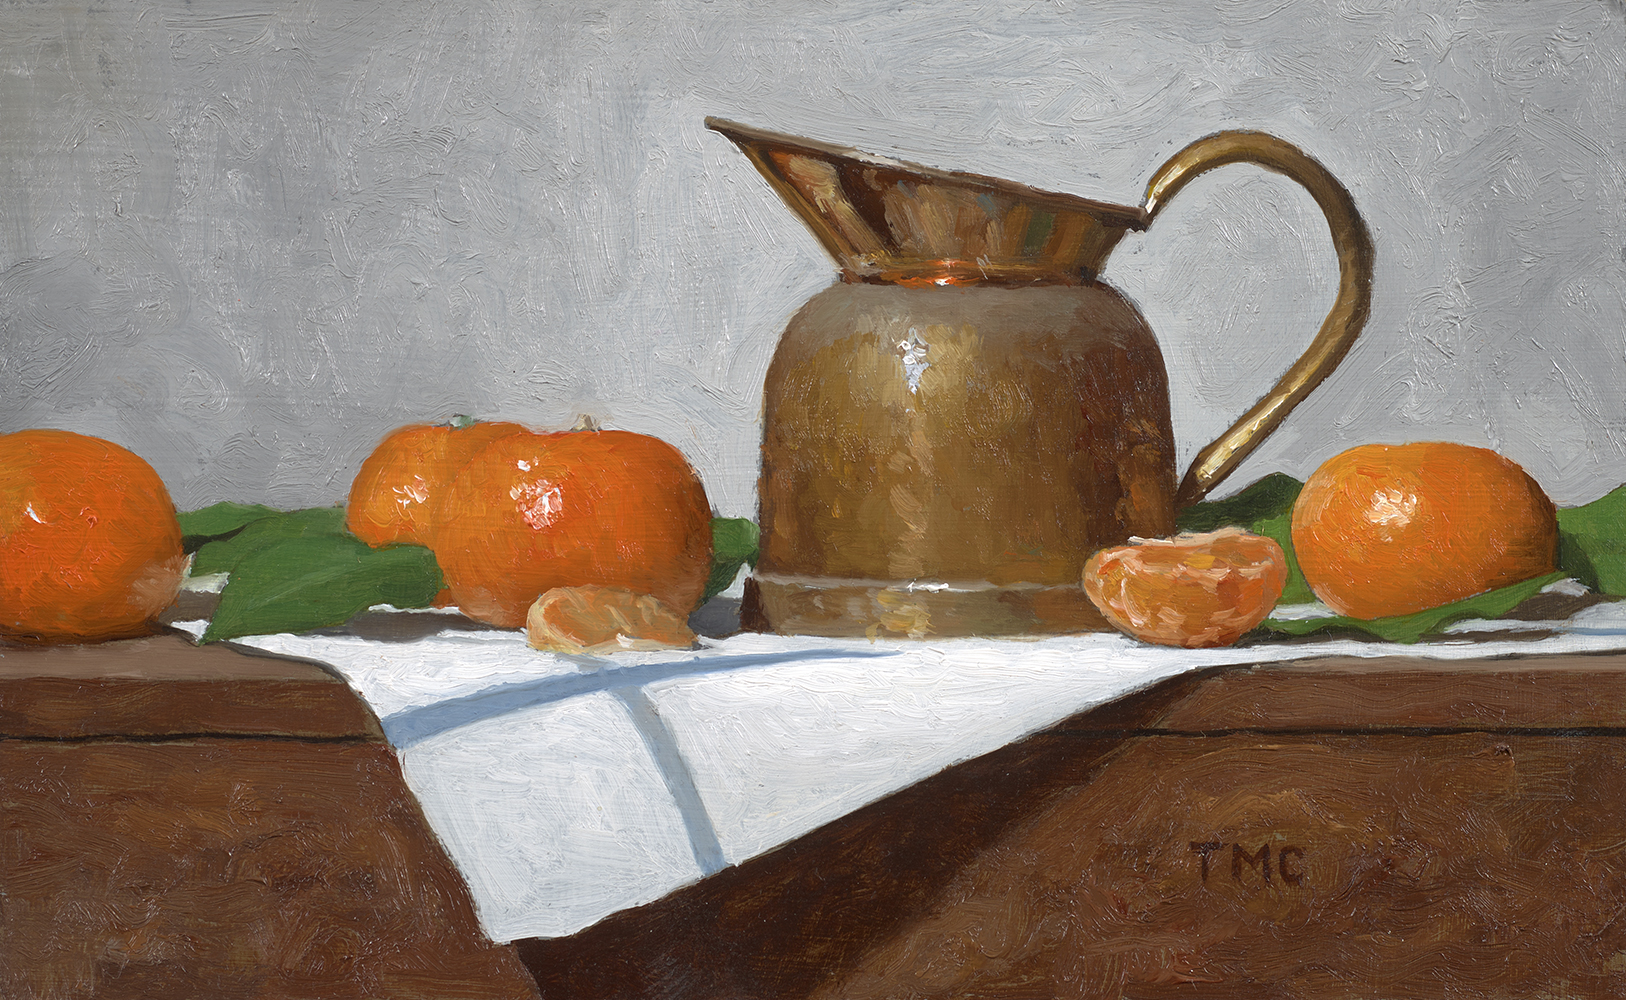 Brass Pot with Clementines, Study - Casey Todd M.